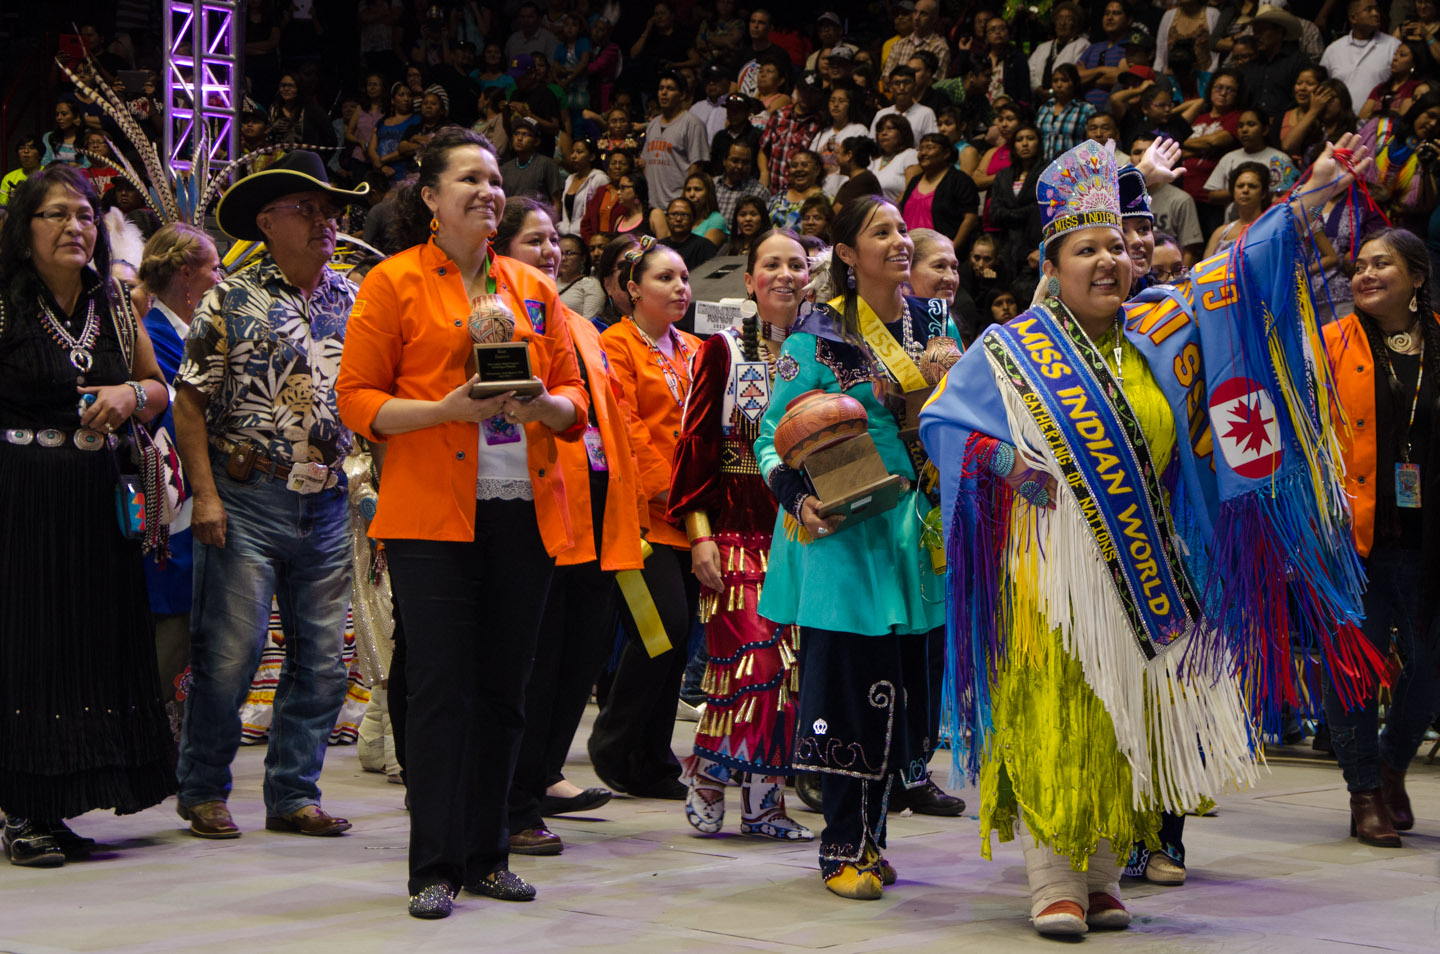 Kansas K. Begaye of the Dine Nation waves at spectators following her crowning as Miss Indian World 2013.